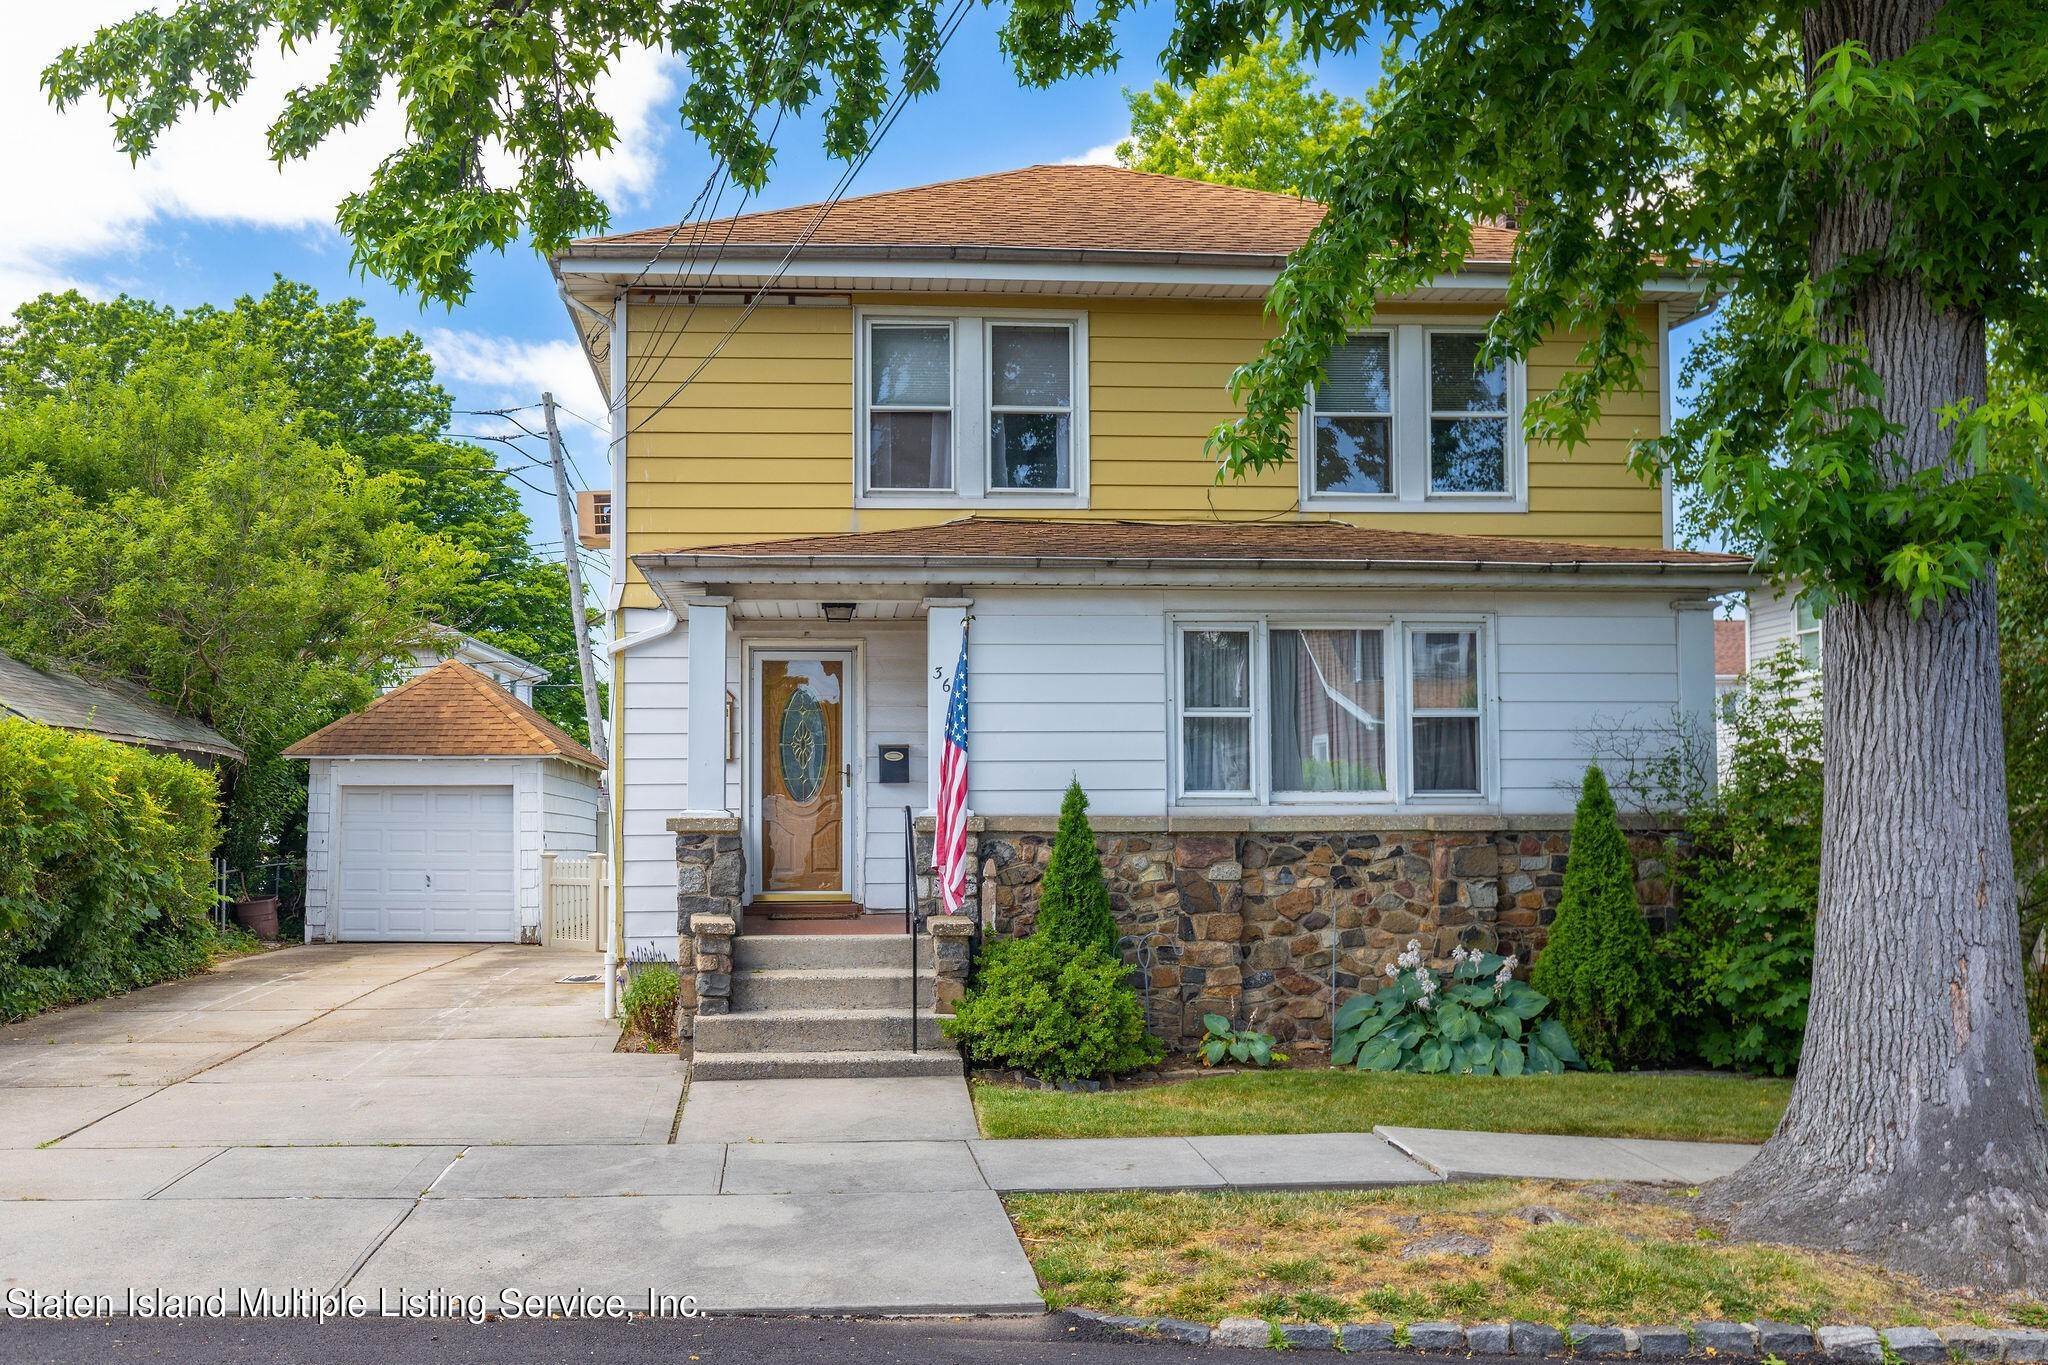 Single Family for Sale at Westerleigh, Staten Island, NY 10314